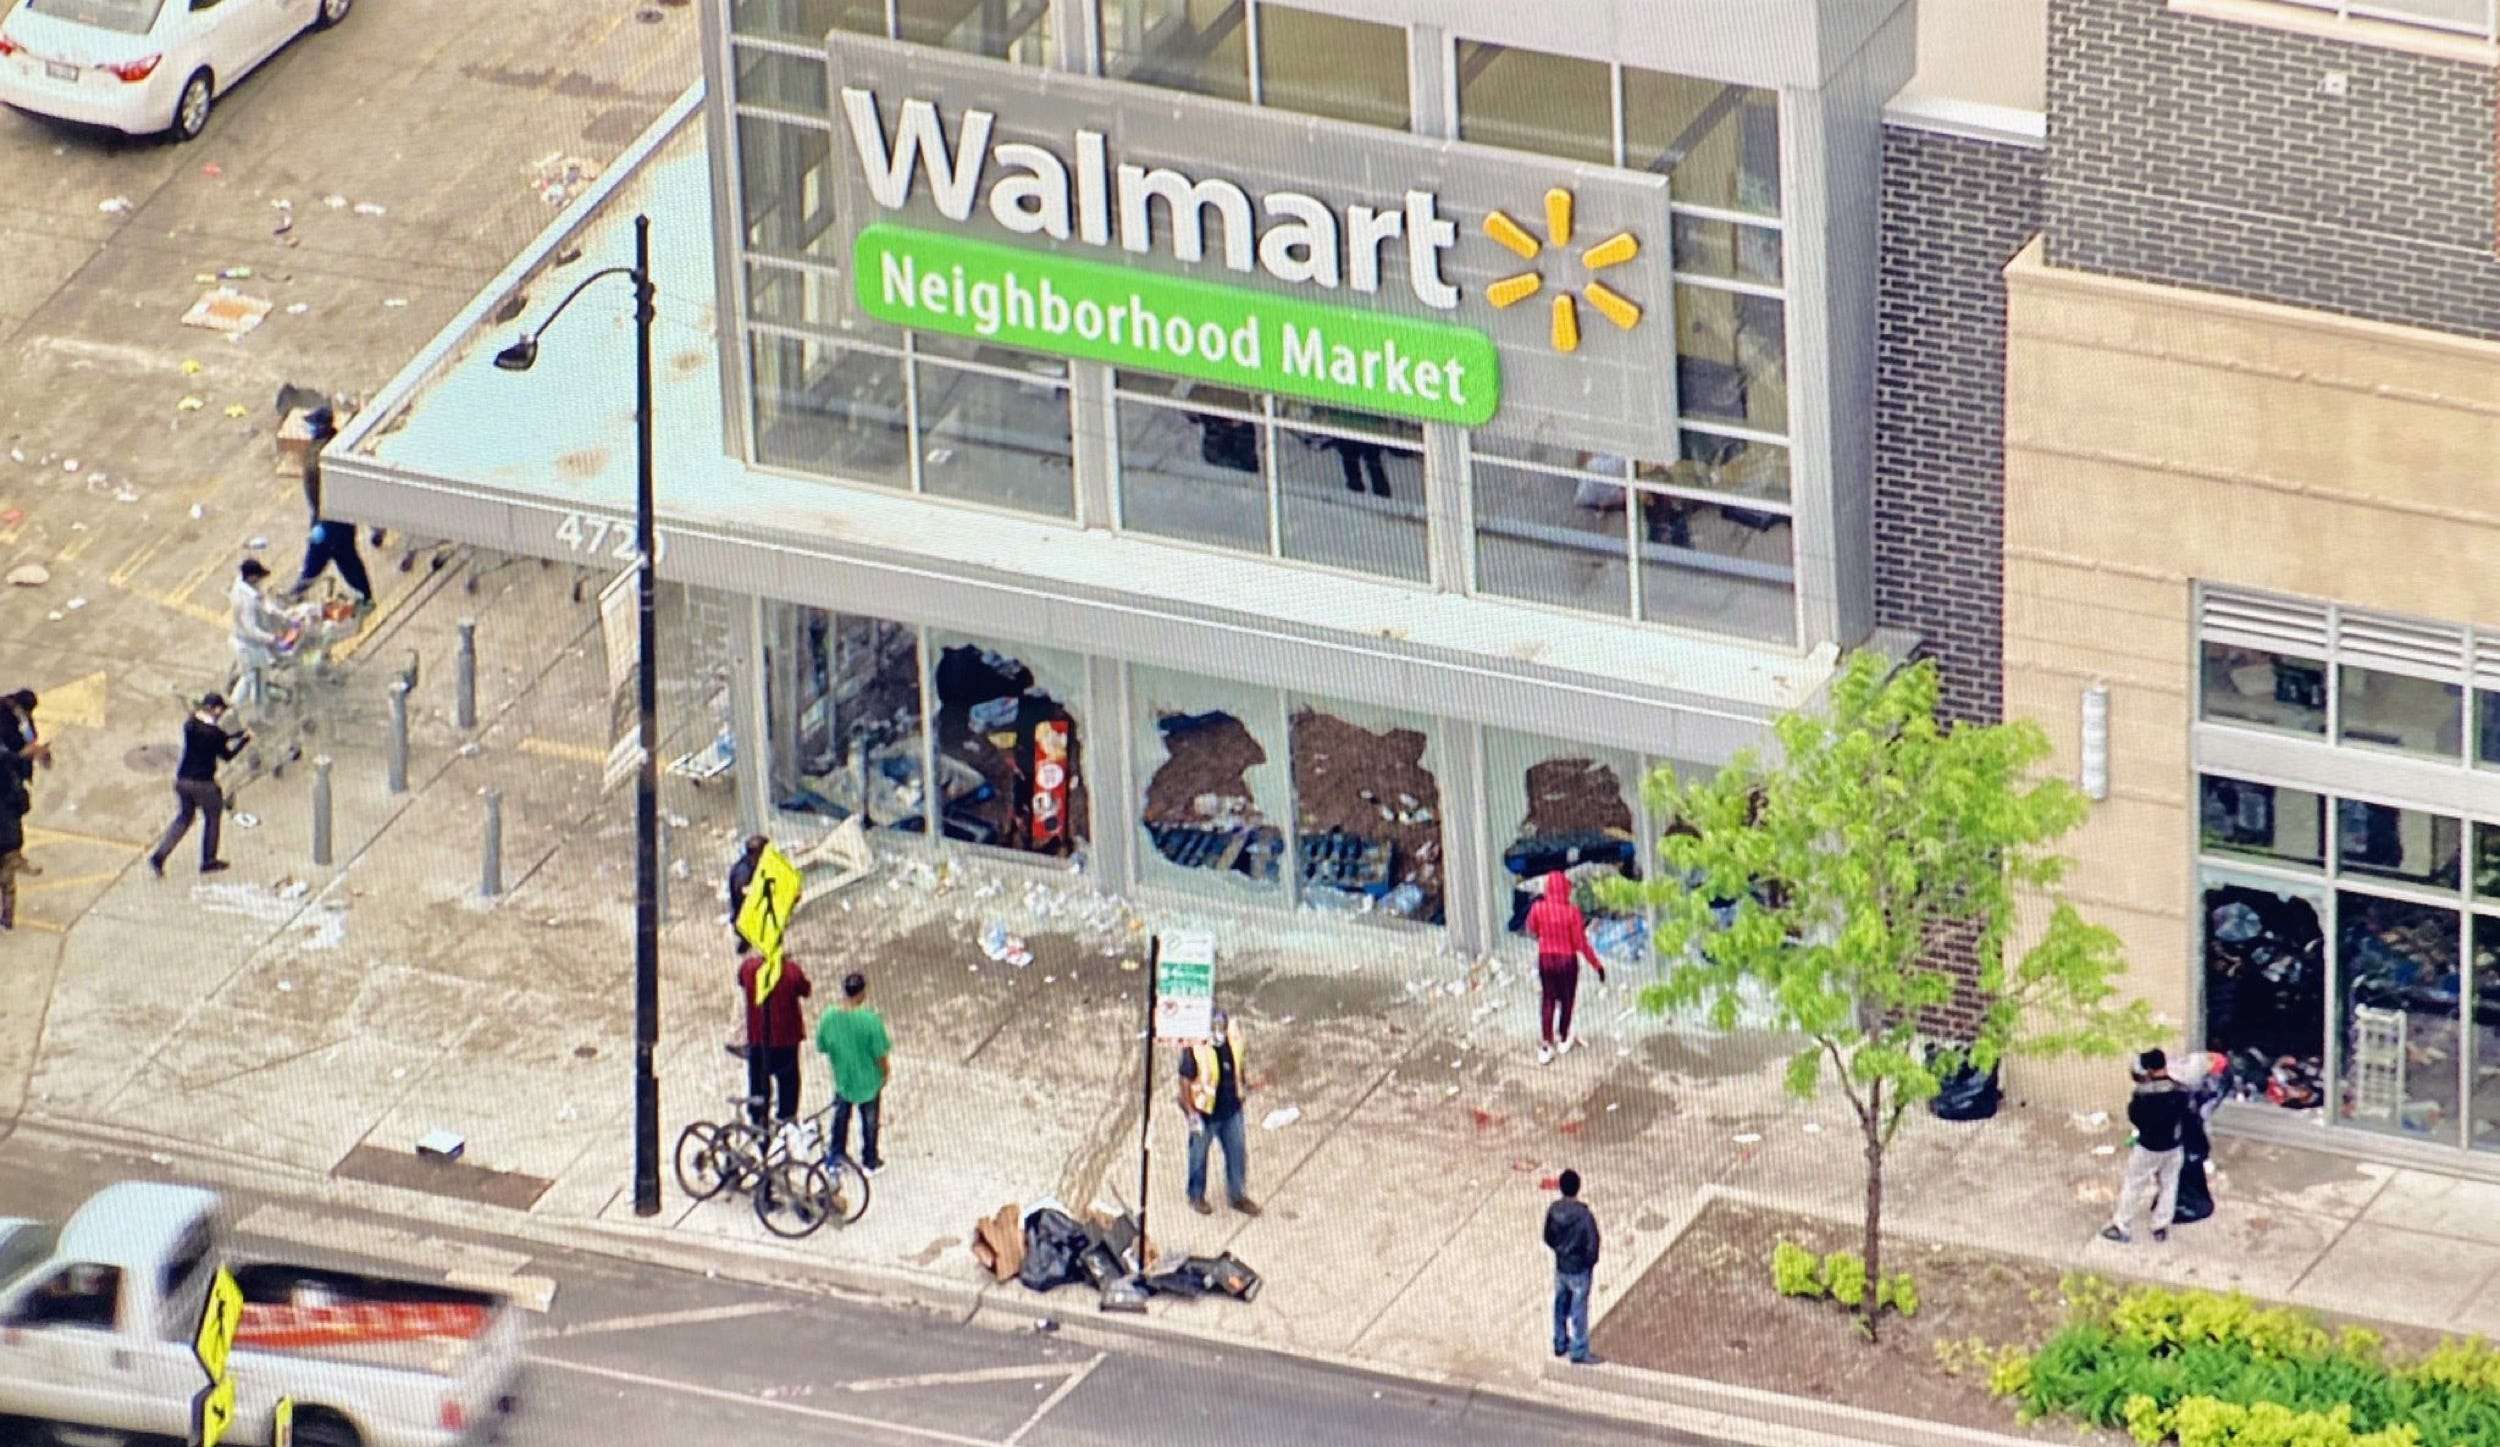 Walmart weighs whether to reopen all Chicagoarea stores damaged by